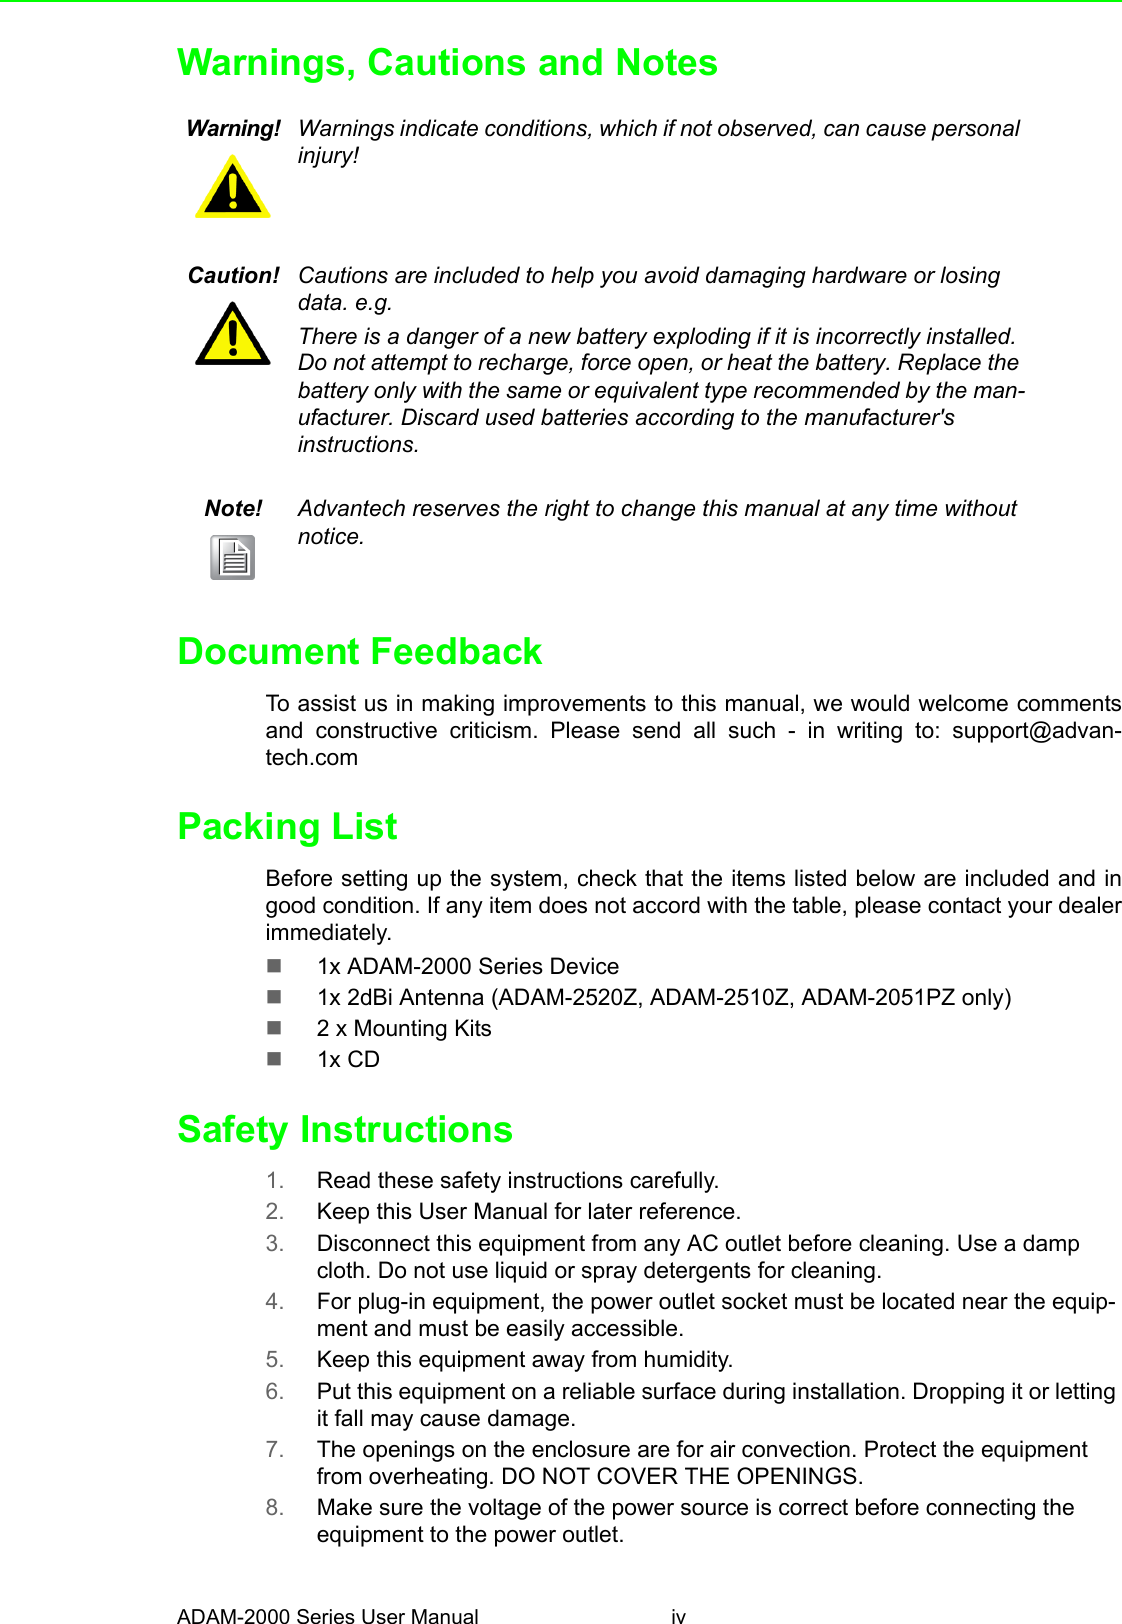 ADAM-2000 Series User Manual ivWarnings, Cautions and NotesDocument FeedbackTo assist us in making improvements to this manual, we would welcome commentsand constructive criticism. Please send all such - in writing to: support@advan-tech.comPacking ListBefore setting up the system, check that the items listed below are included and ingood condition. If any item does not accord with the table, please contact your dealerimmediately.1x ADAM-2000 Series Device1x 2dBi Antenna (ADAM-2520Z, ADAM-2510Z, ADAM-2051PZ only)2 x Mounting Kits1x CDSafety Instructions1. Read these safety instructions carefully.2. Keep this User Manual for later reference.3. Disconnect this equipment from any AC outlet before cleaning. Use a damp cloth. Do not use liquid or spray detergents for cleaning.4. For plug-in equipment, the power outlet socket must be located near the equip-ment and must be easily accessible.5. Keep this equipment away from humidity.6. Put this equipment on a reliable surface during installation. Dropping it or letting it fall may cause damage.7. The openings on the enclosure are for air convection. Protect the equipment from overheating. DO NOT COVER THE OPENINGS.8. Make sure the voltage of the power source is correct before connecting the equipment to the power outlet.Warning! Warnings indicate conditions, which if not observed, can cause personal injury!Caution! Cautions are included to help you avoid damaging hardware or losing data. e.g.There is a danger of a new battery exploding if it is incorrectly installed. Do not attempt to recharge, force open, or heat the battery. Replace the battery only with the same or equivalent type recommended by the man-ufacturer. Discard used batteries according to the manufacturer&apos;s instructions.Note! Advantech reserves the right to change this manual at any time without notice.